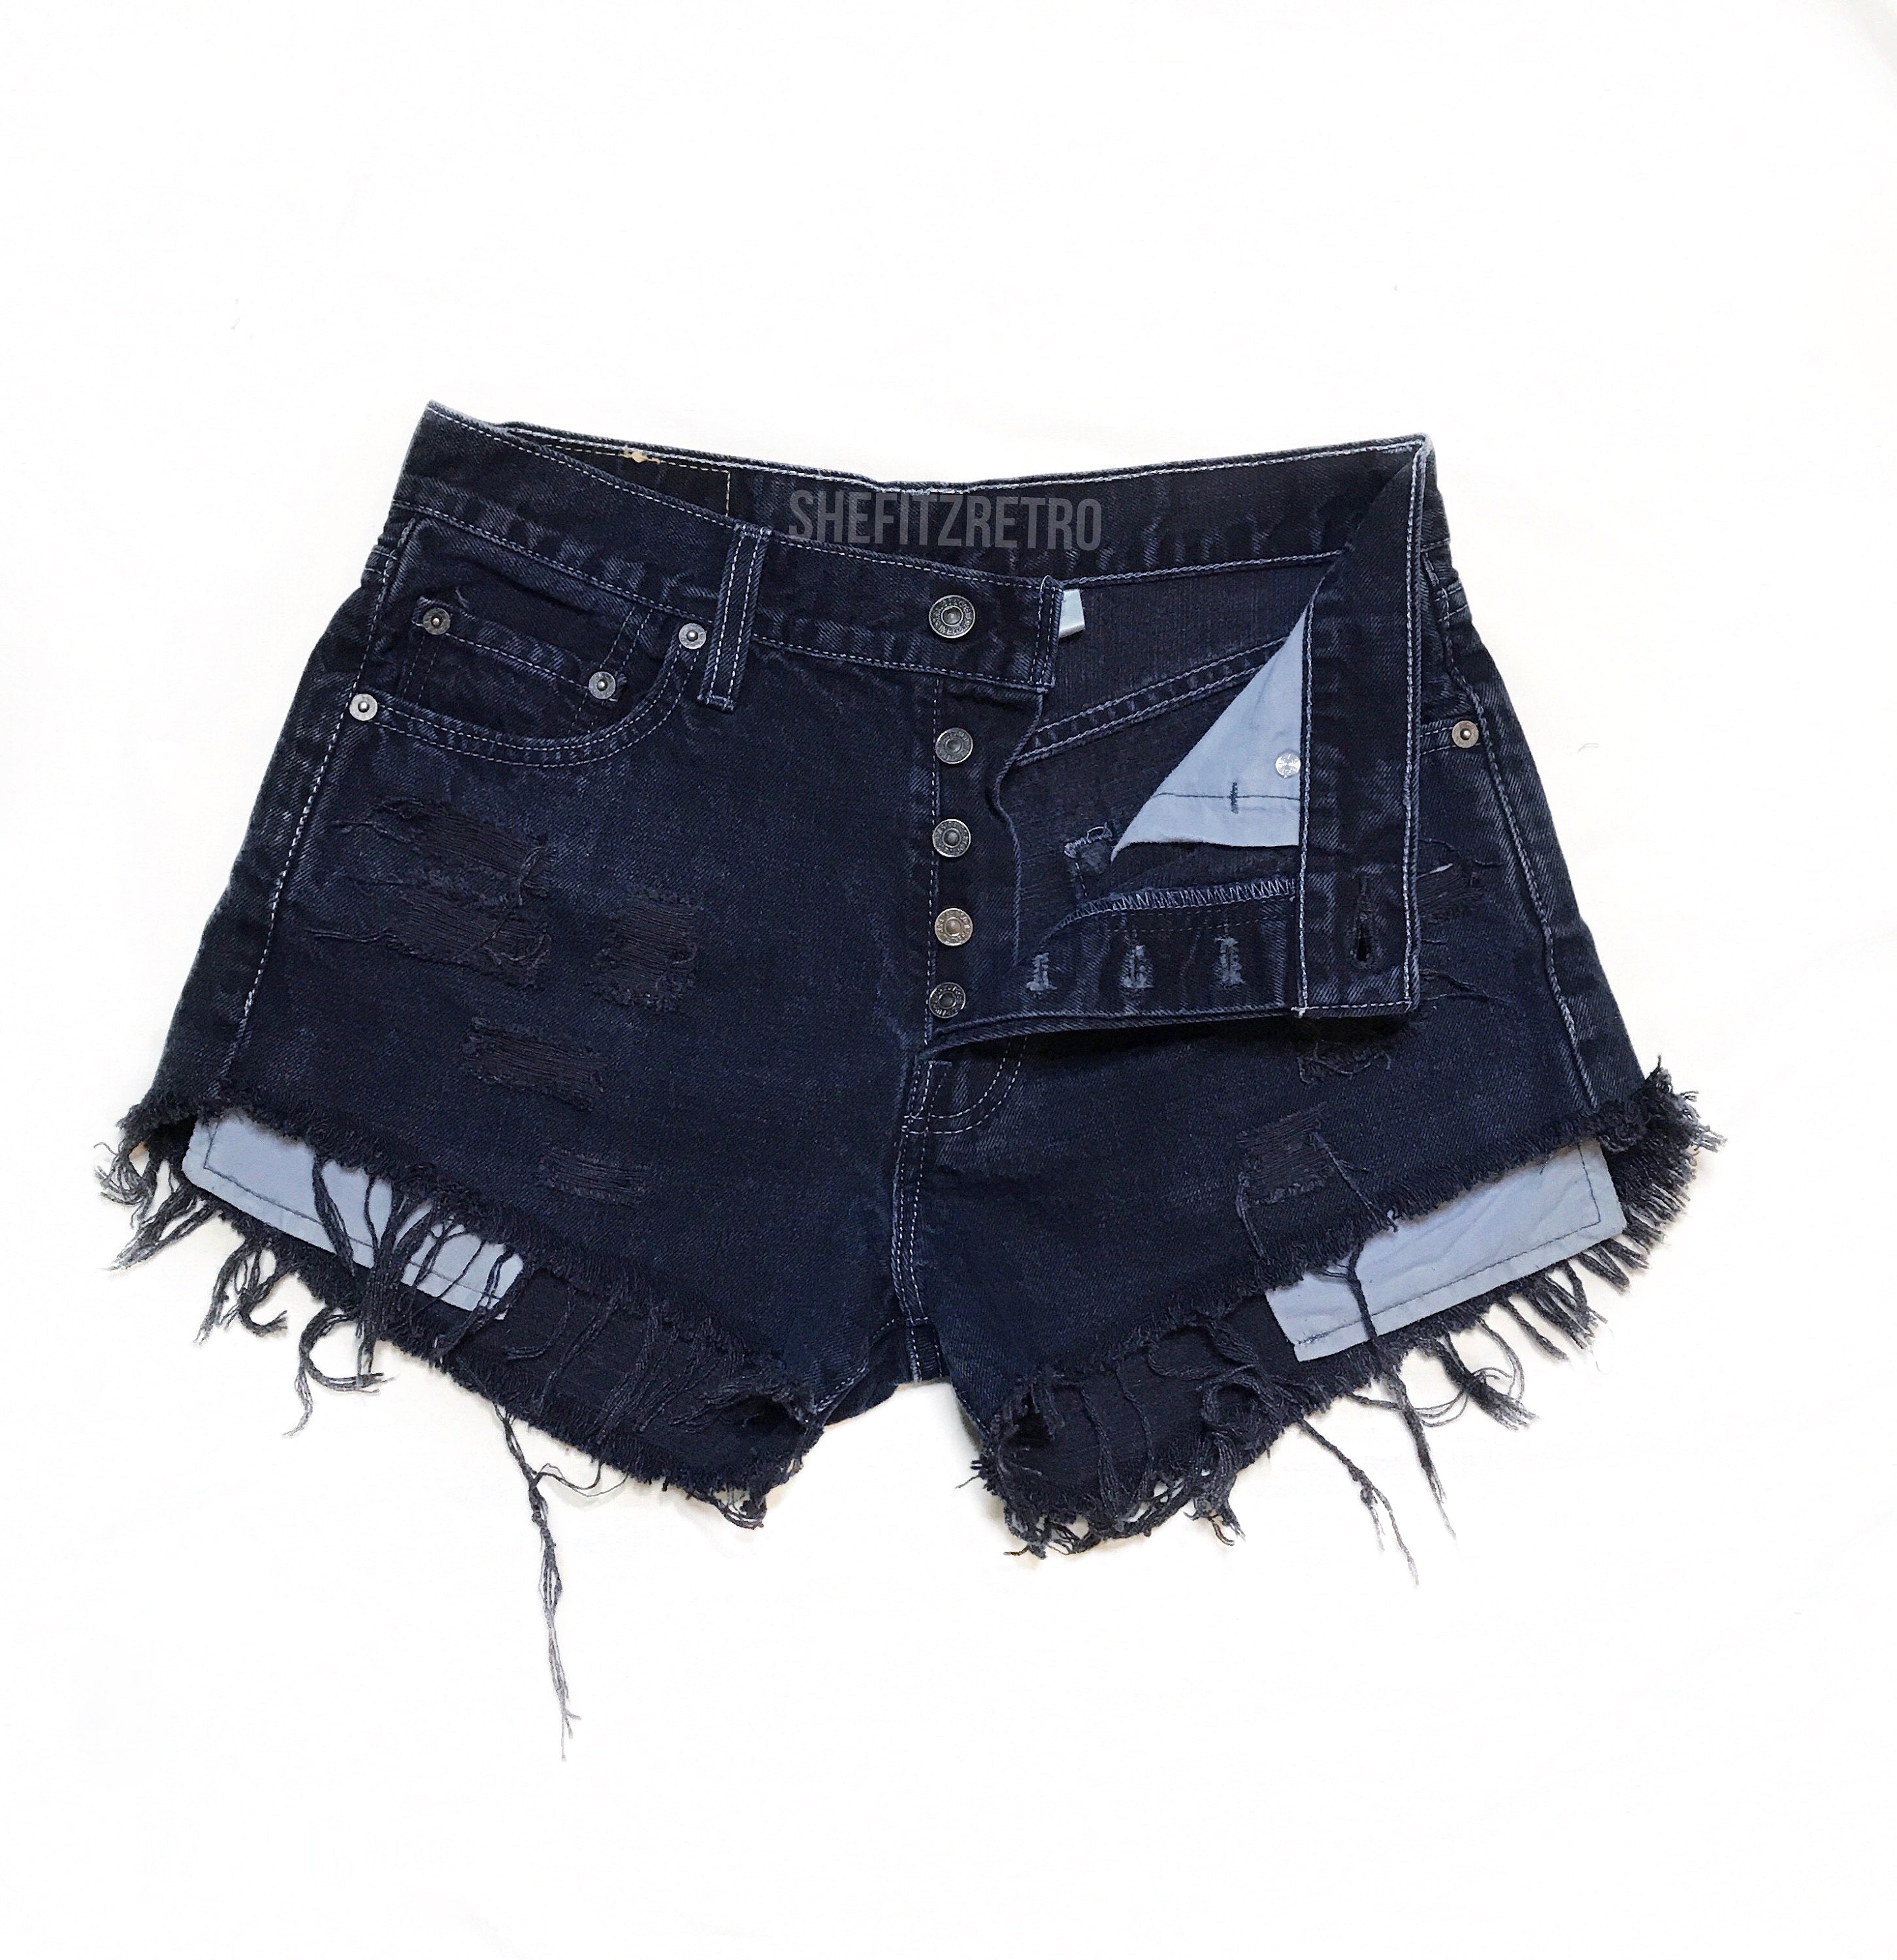 Vintage 501 Deep Navy Blue Distressed Cut Off High Waisted Levis